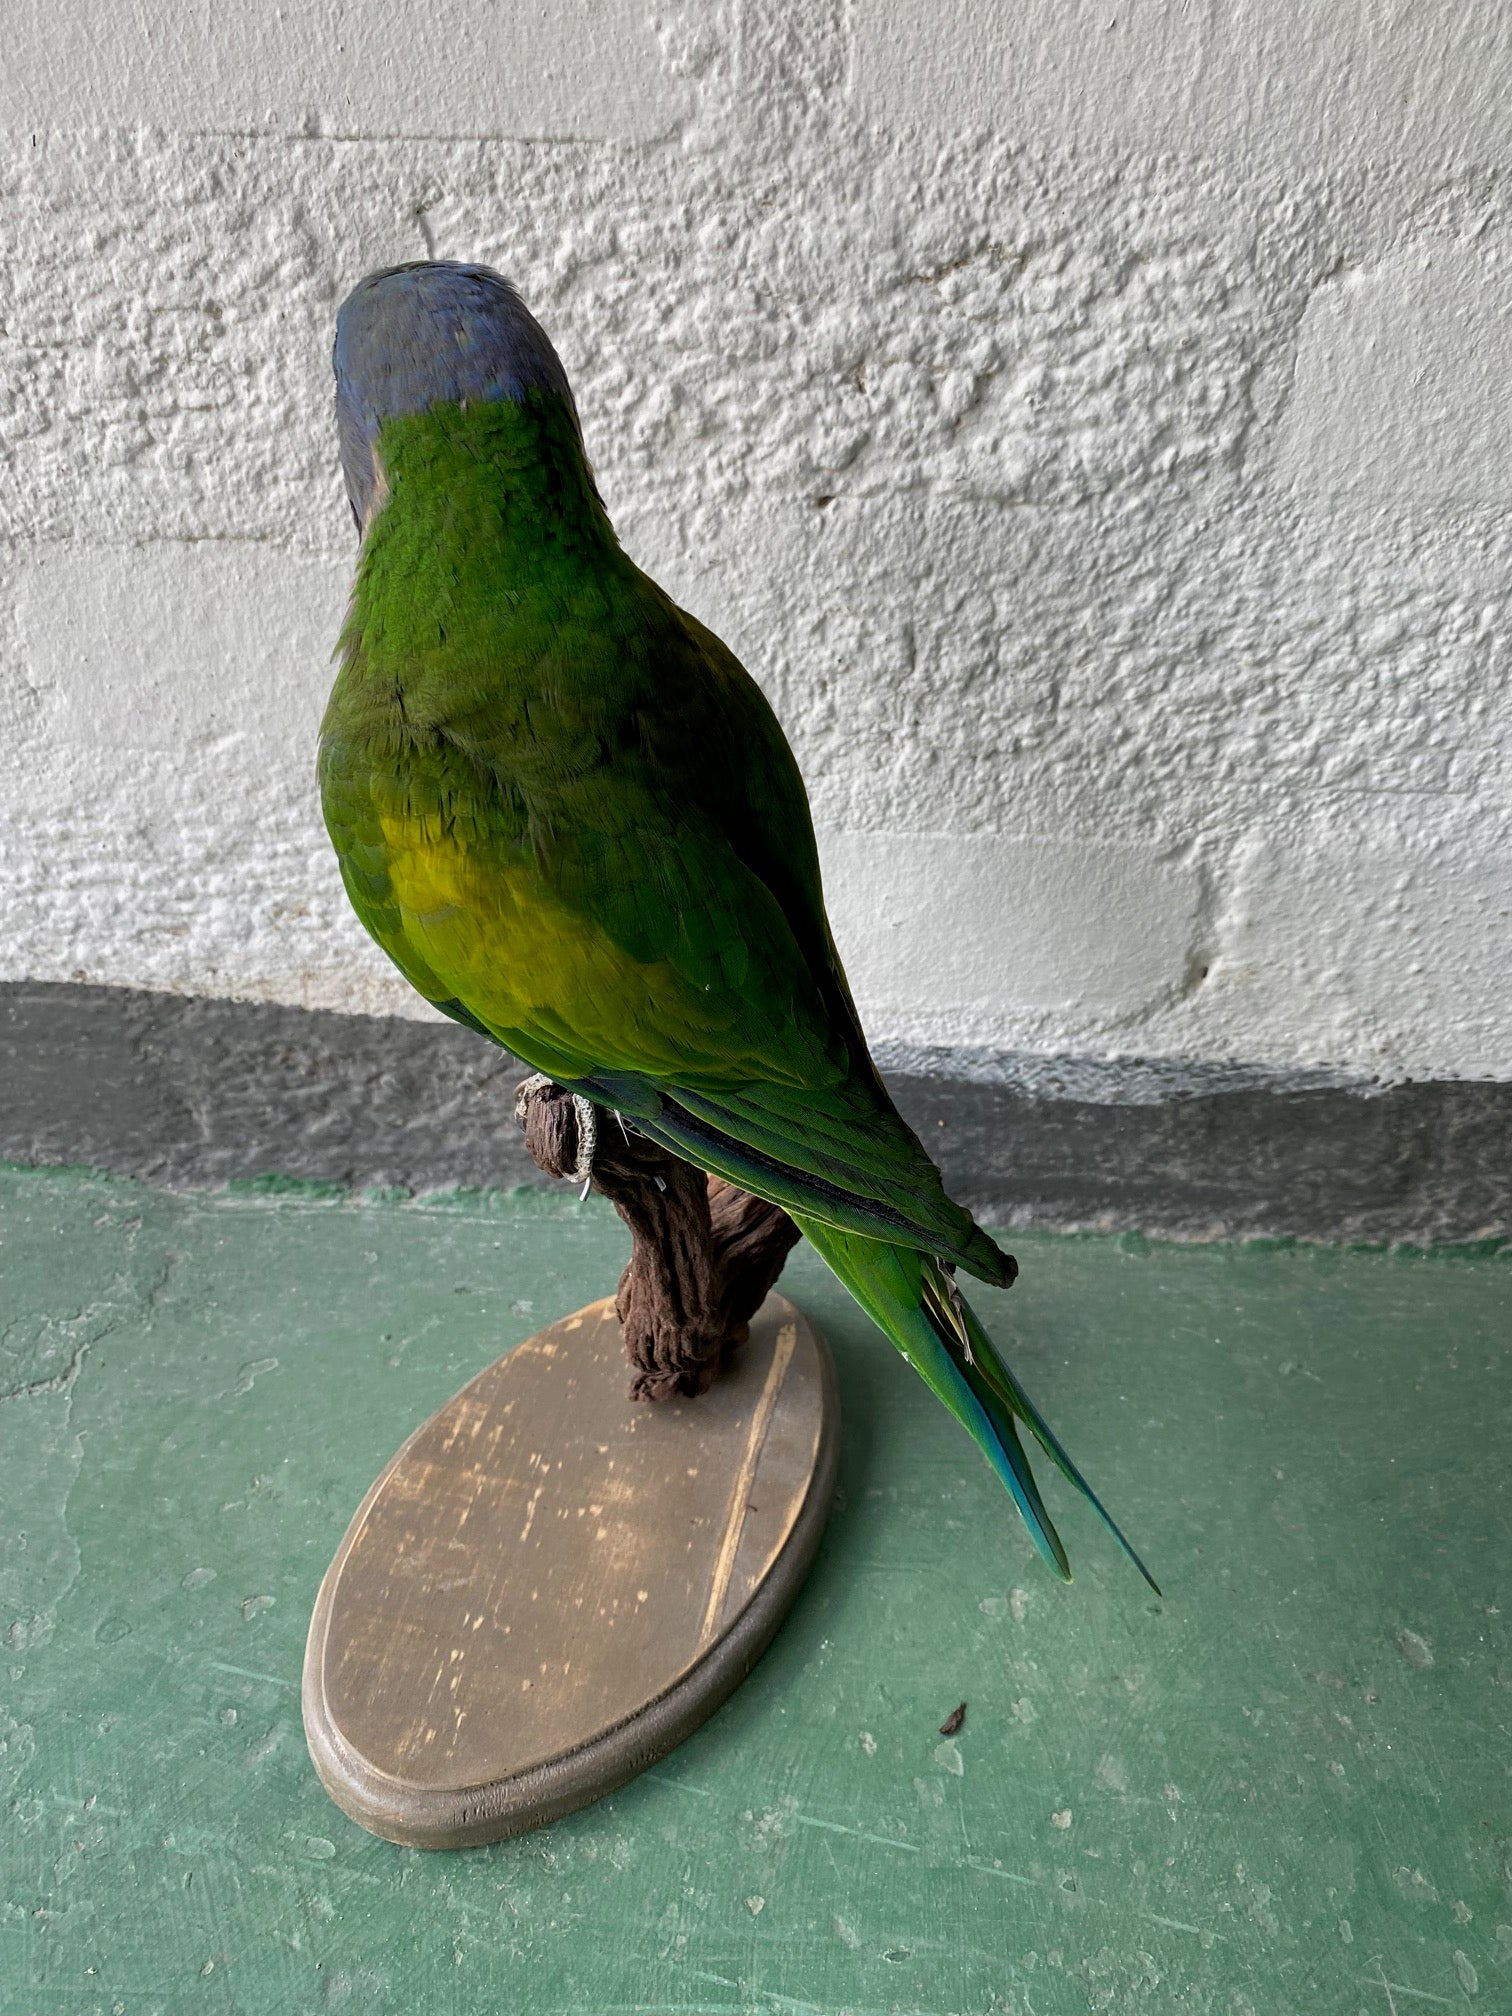 Lord Derby's Parakeet